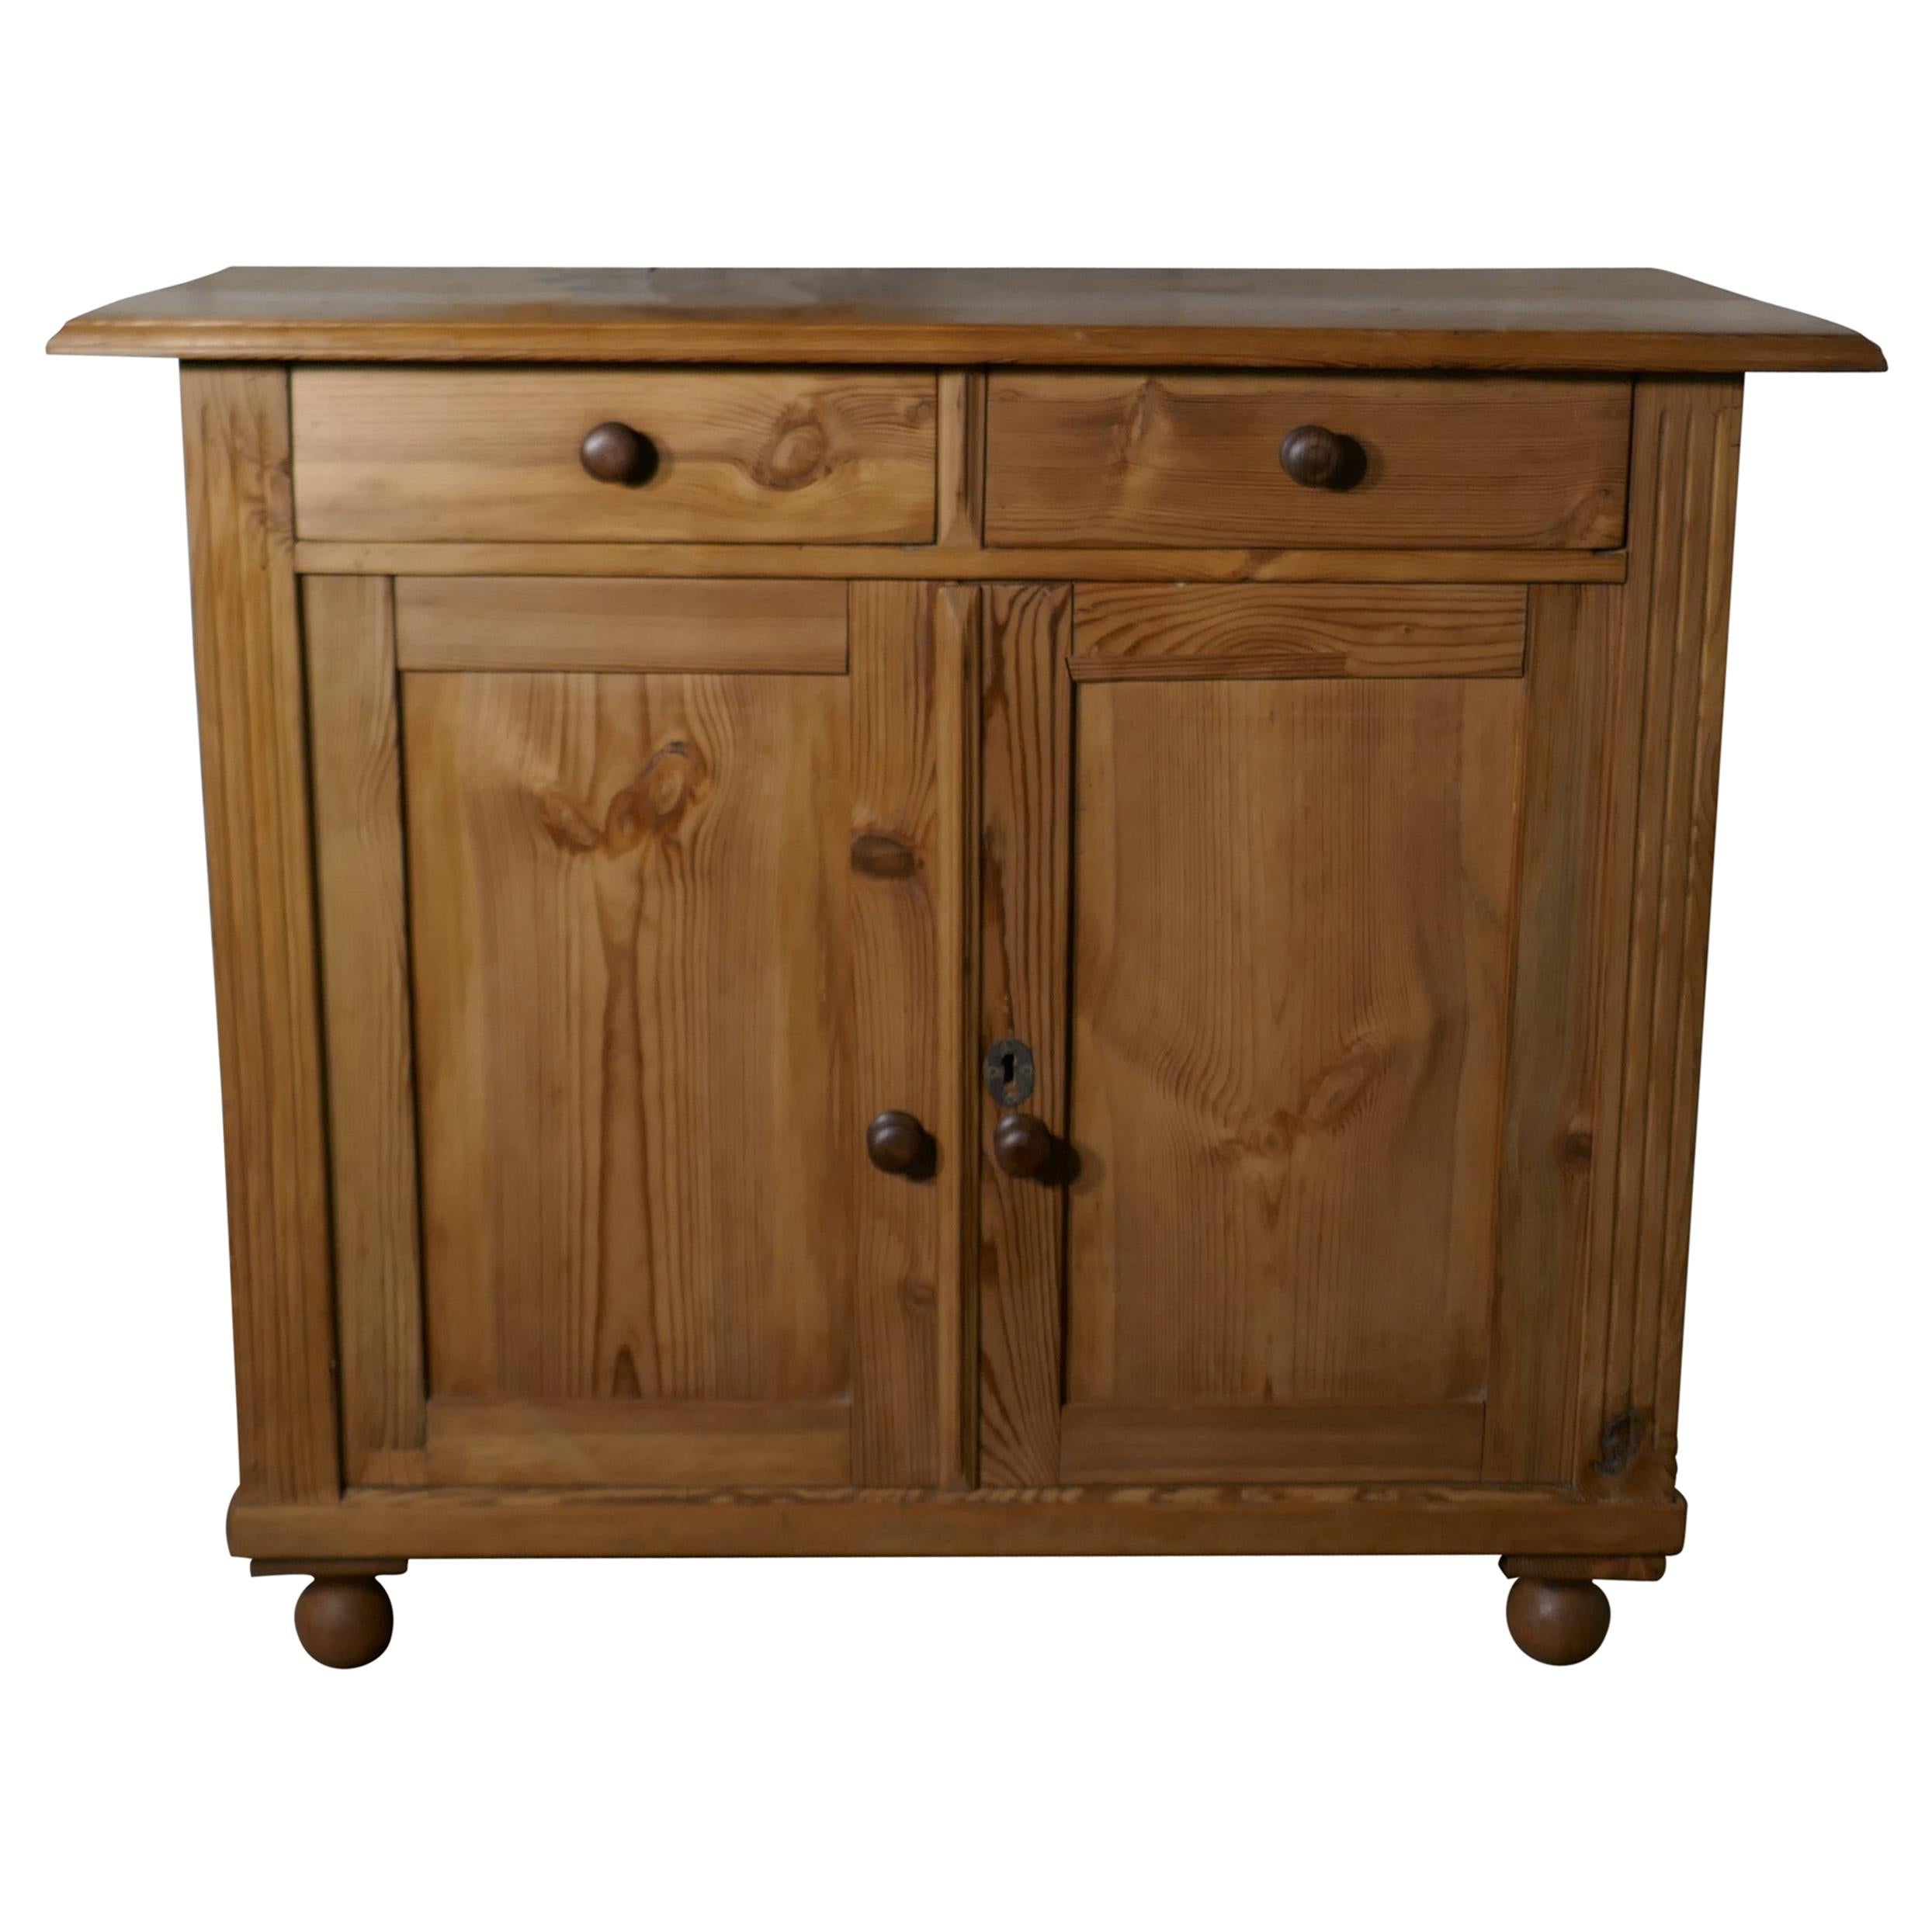 Victorian Stripped Pine Sideboard or Cupboard